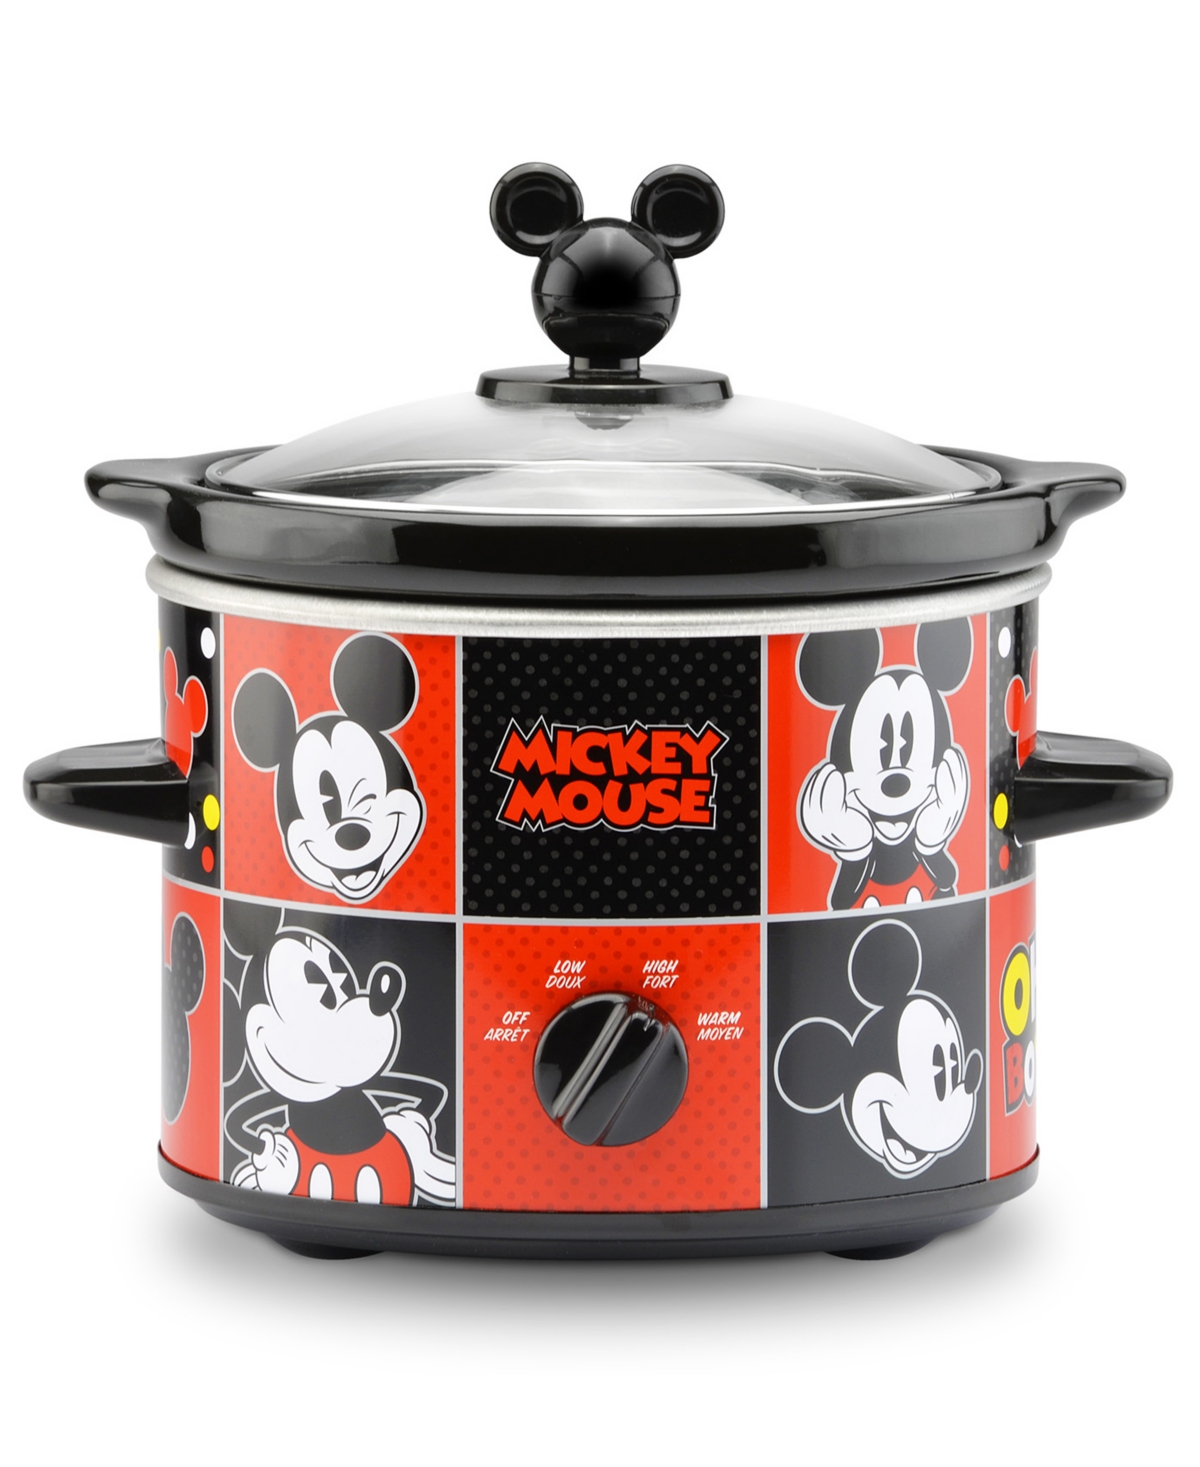 Disney Mickey Mouse 2-quart Slow Cooker In Red